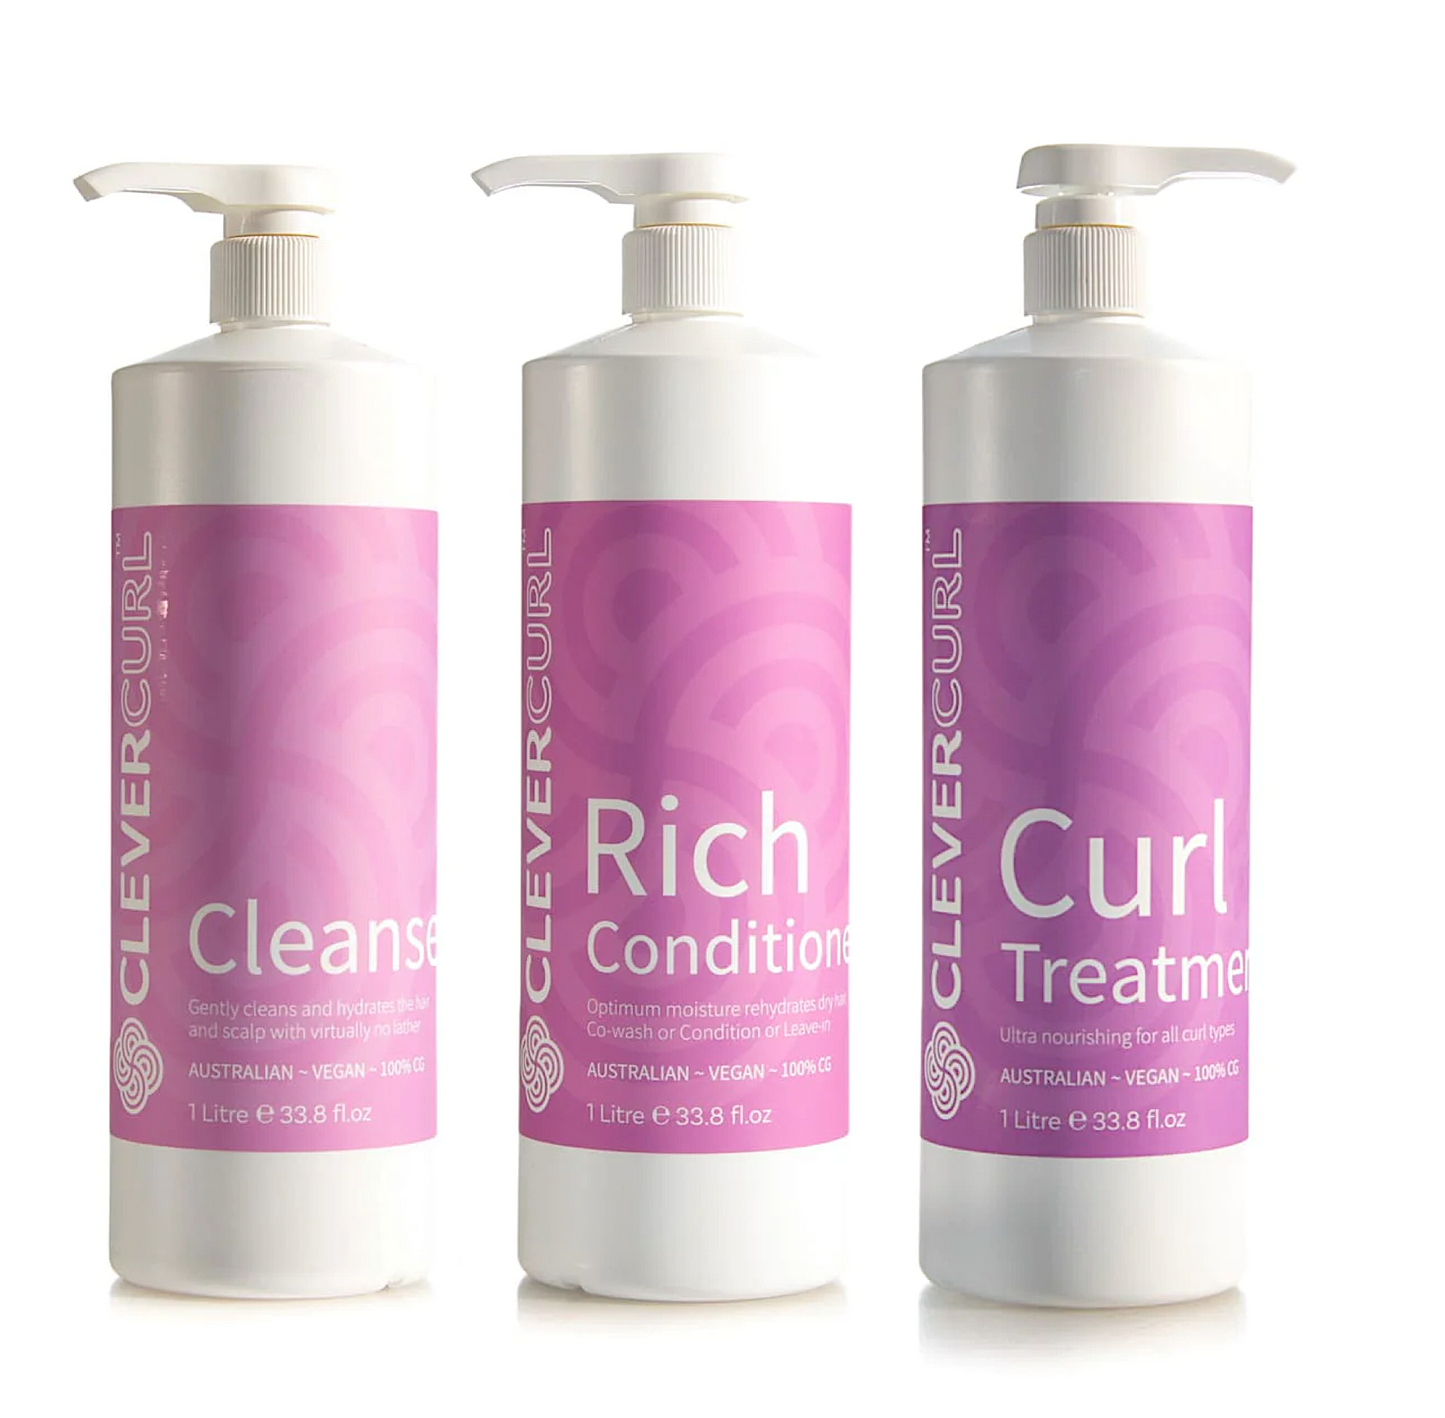 Clever Curl Cleanser Shampoo and Rich Conditioner + Curl Treatment 1000ml Trio